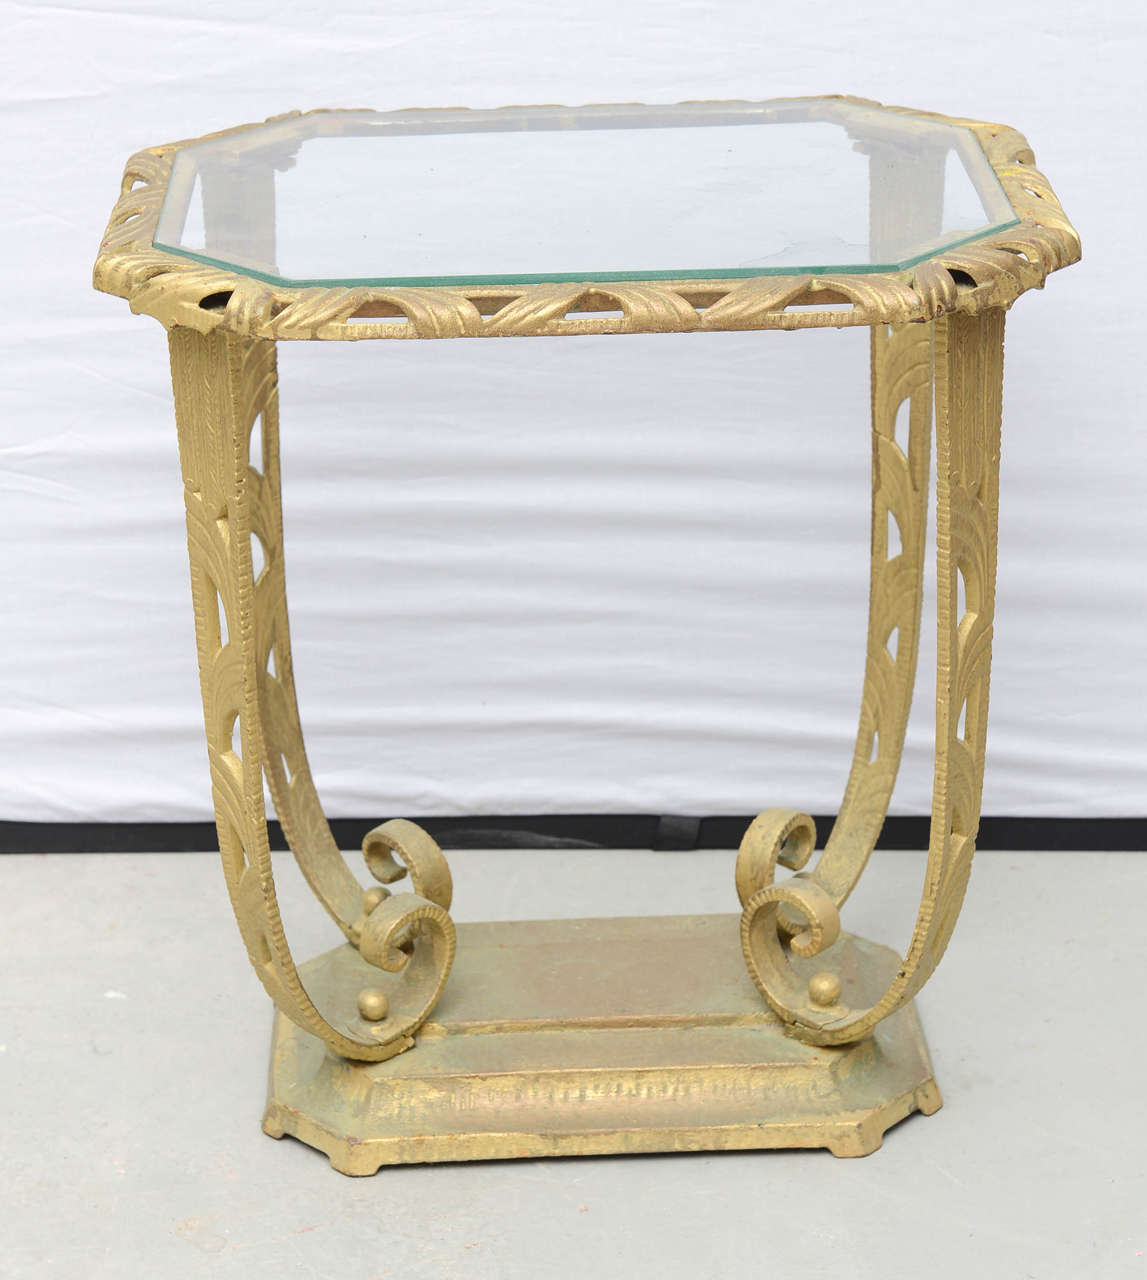 Beautiful heavy glass and metal Hollywood Regency side table from the USA 1930s.